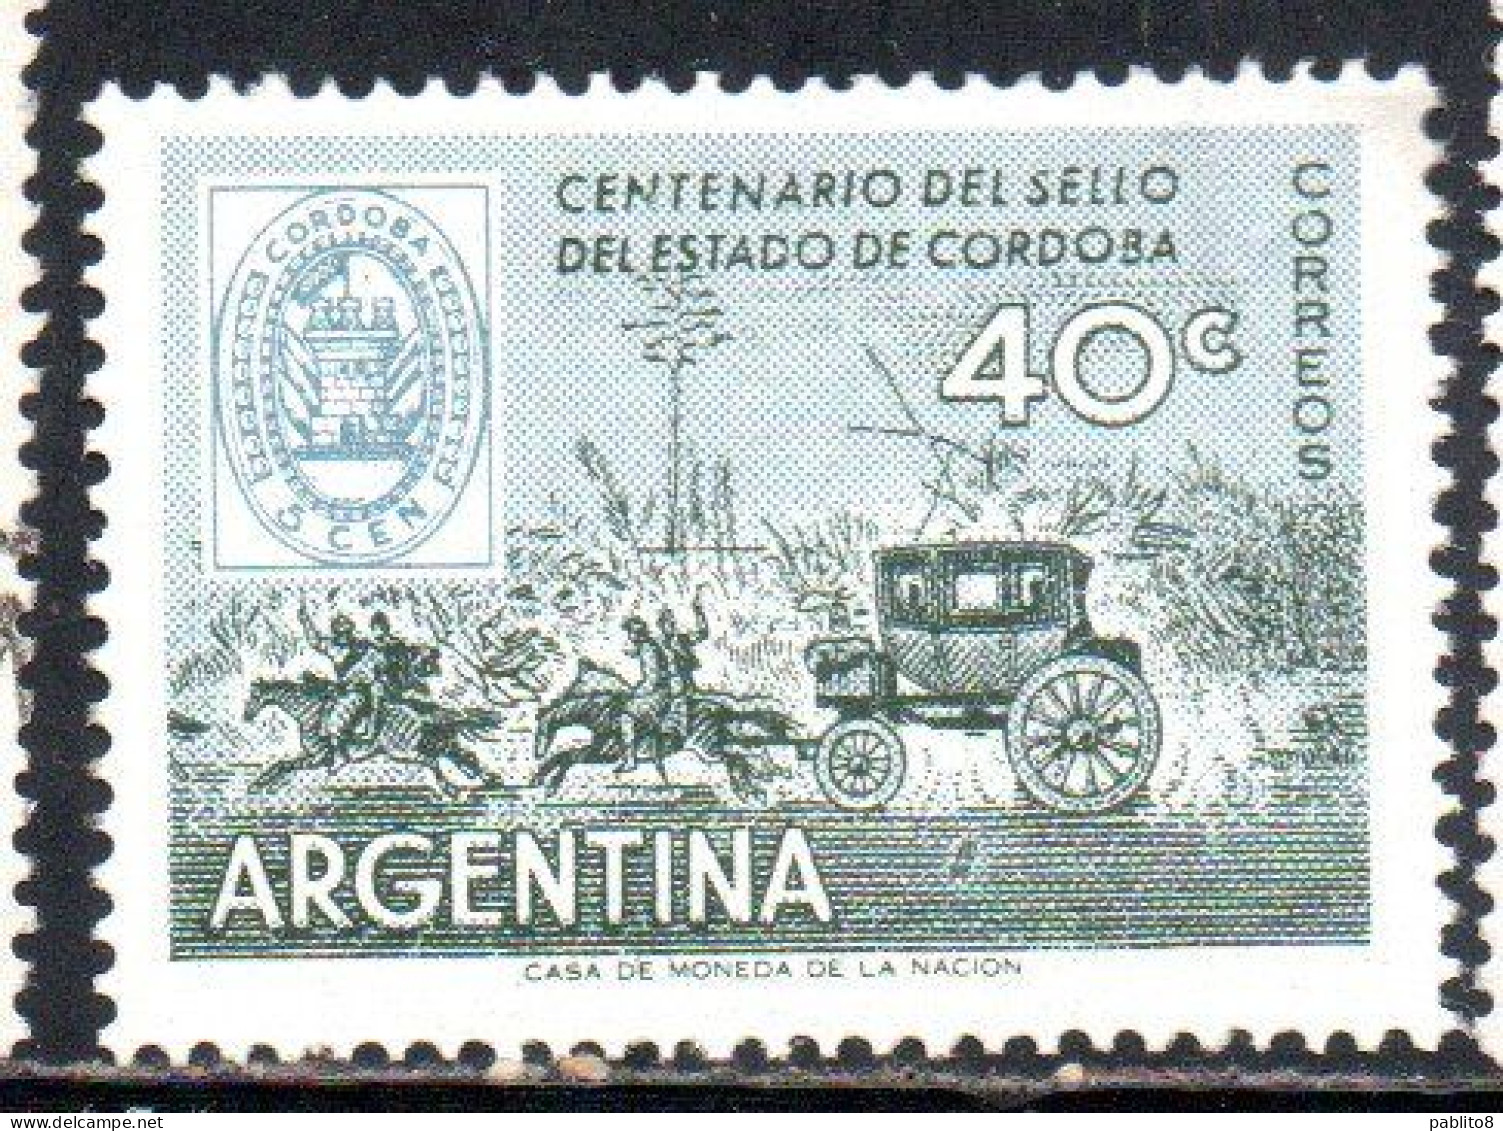 ARGENTINA 1958 CENTENARY OF CORDOBA POSTAGE STAMPS STAMP AND MAIL COACH 40c MNH - Unused Stamps